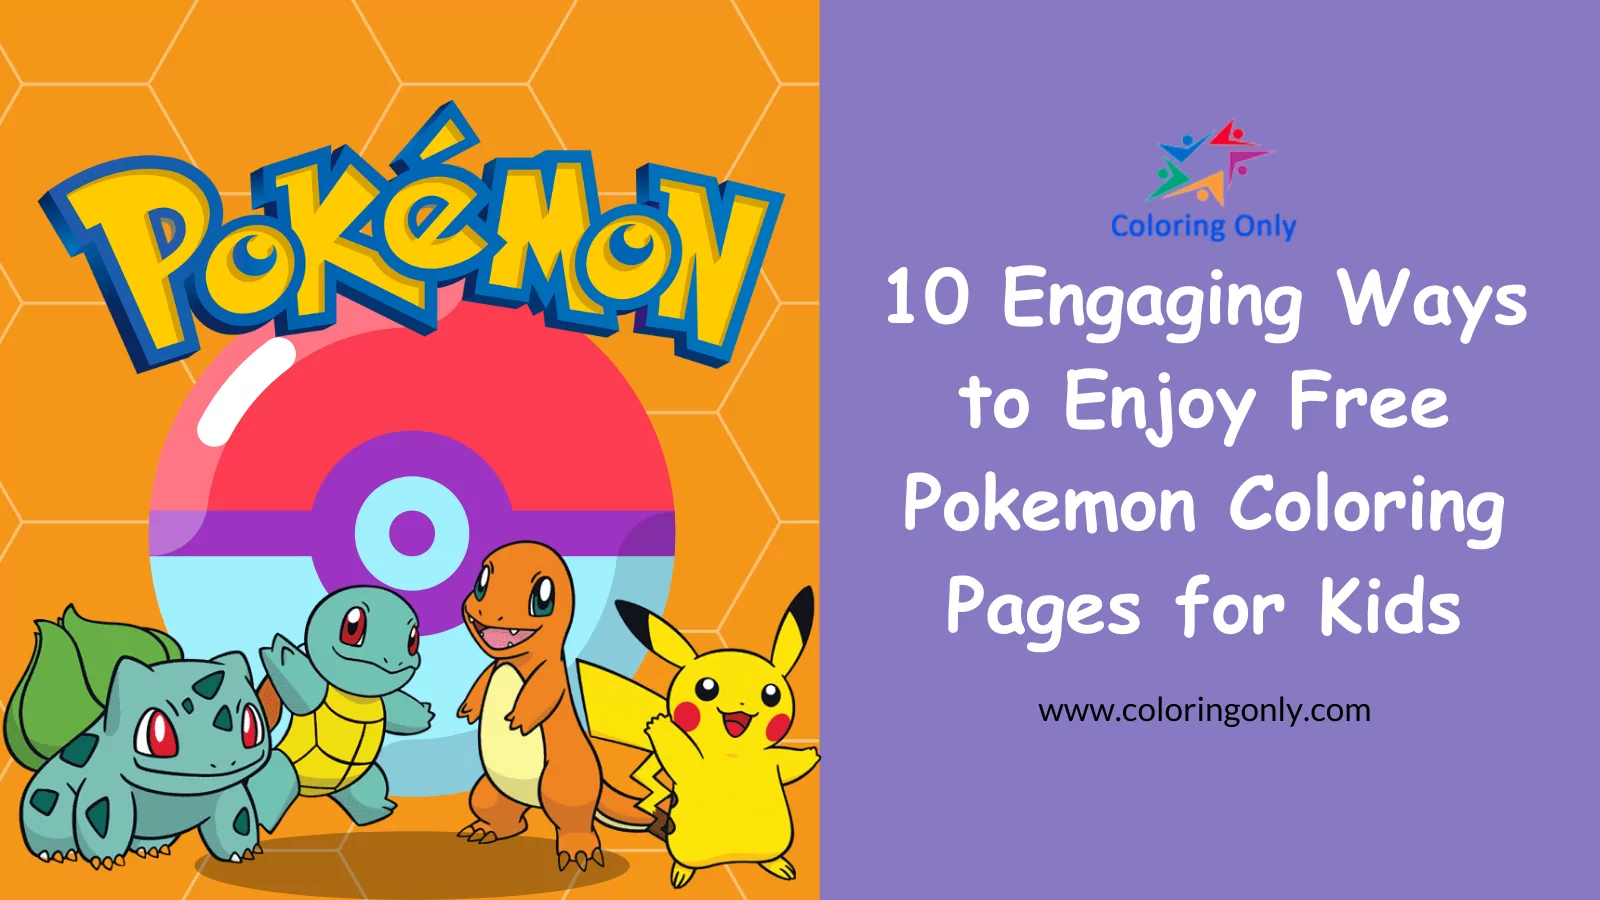 10 Engaging Ways to Enjoy Free Pokemon Coloring Pages for Kids